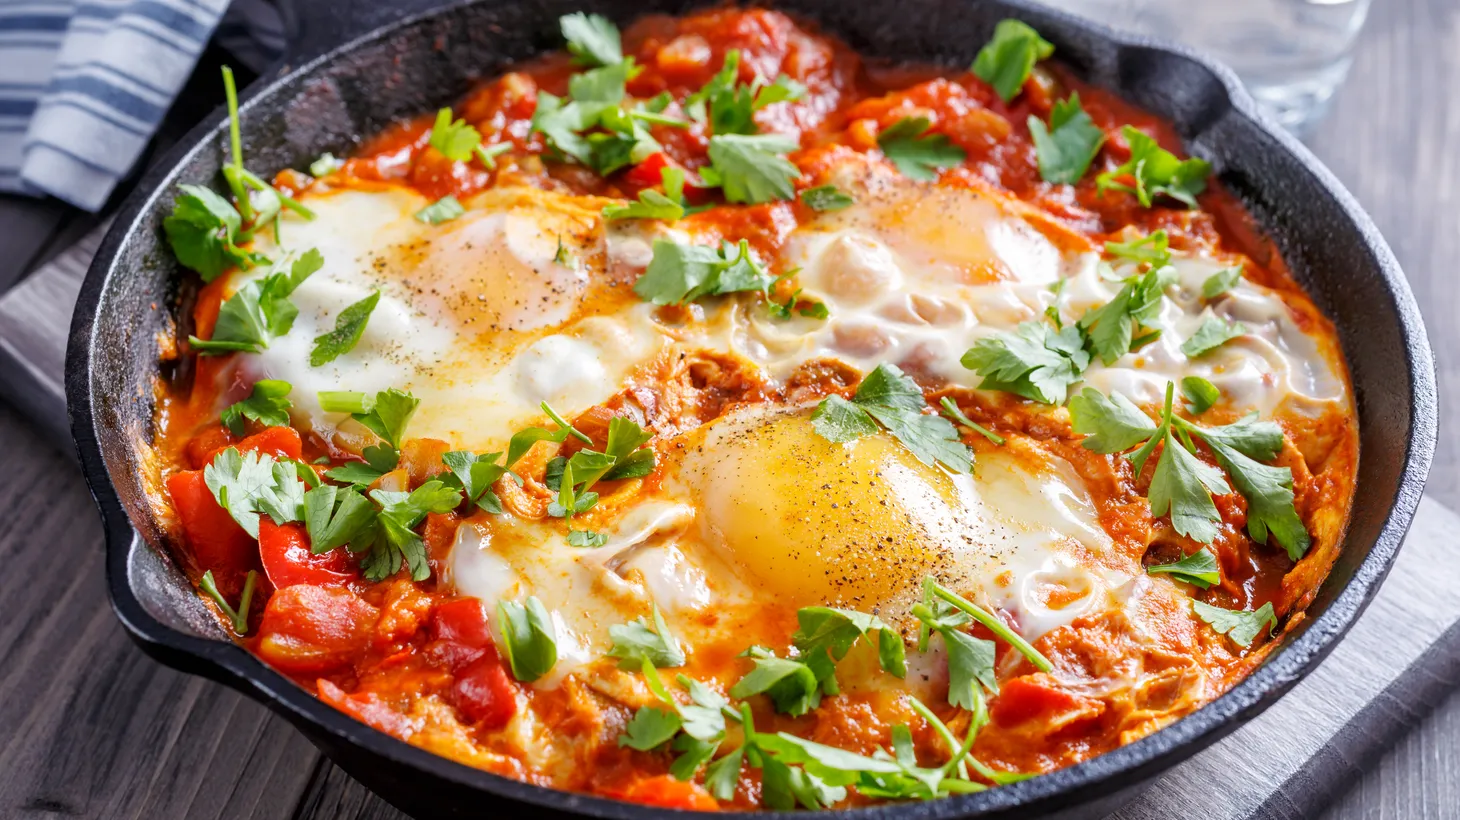 Shakshuka contains peppers, onion, tomatoes, and harissa.